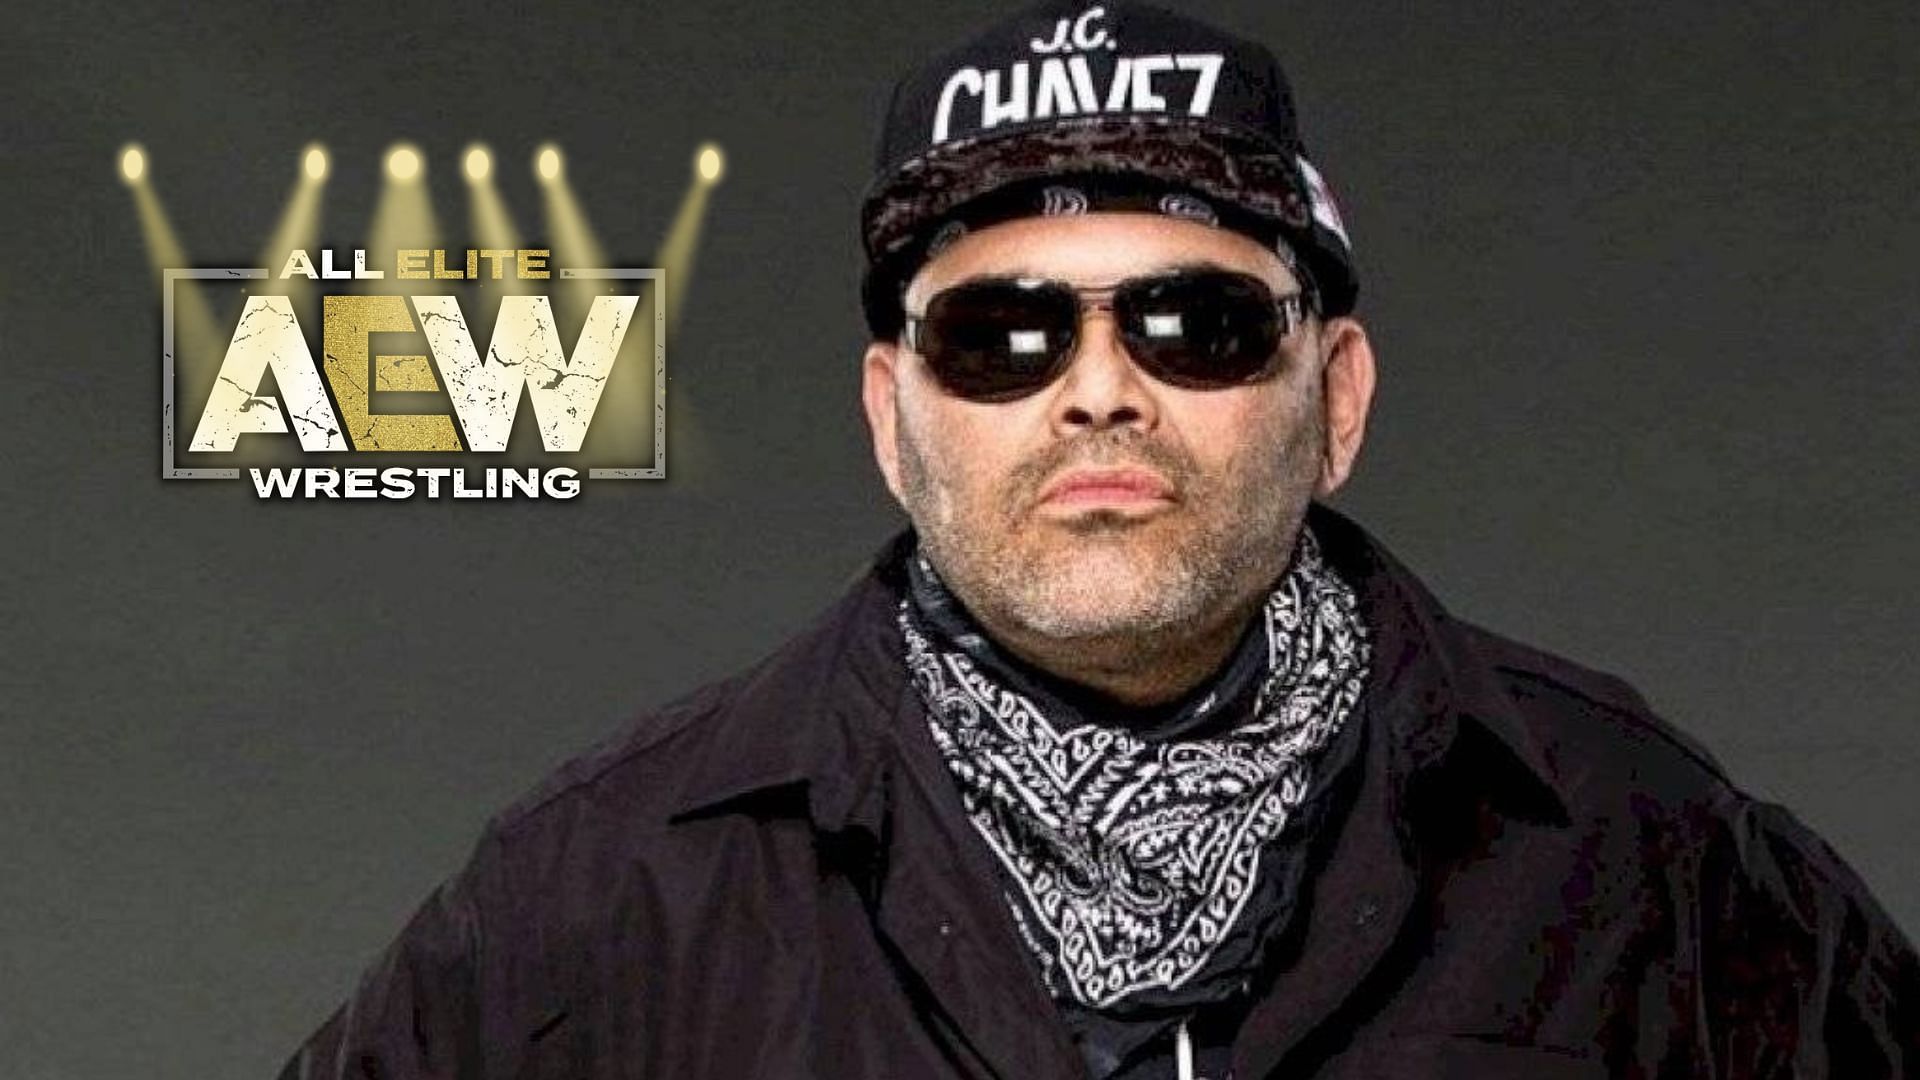 Konnan had some interesting comments this week